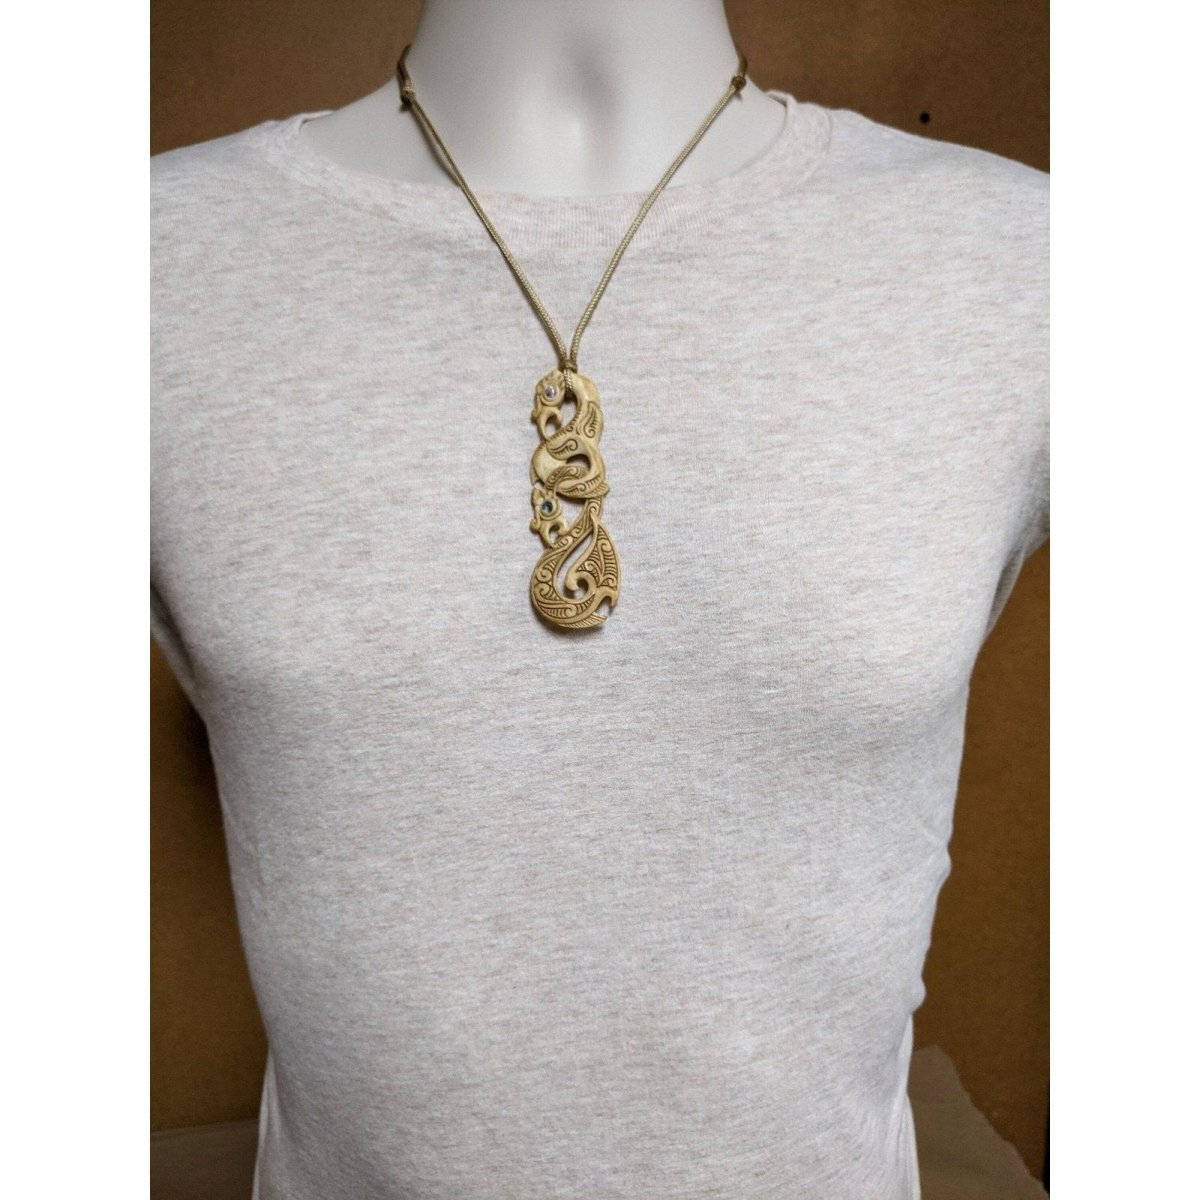 New Zealand Maori Inspired Hand Carved Aged Bone Manaia Necklace - Earthbound Pacific